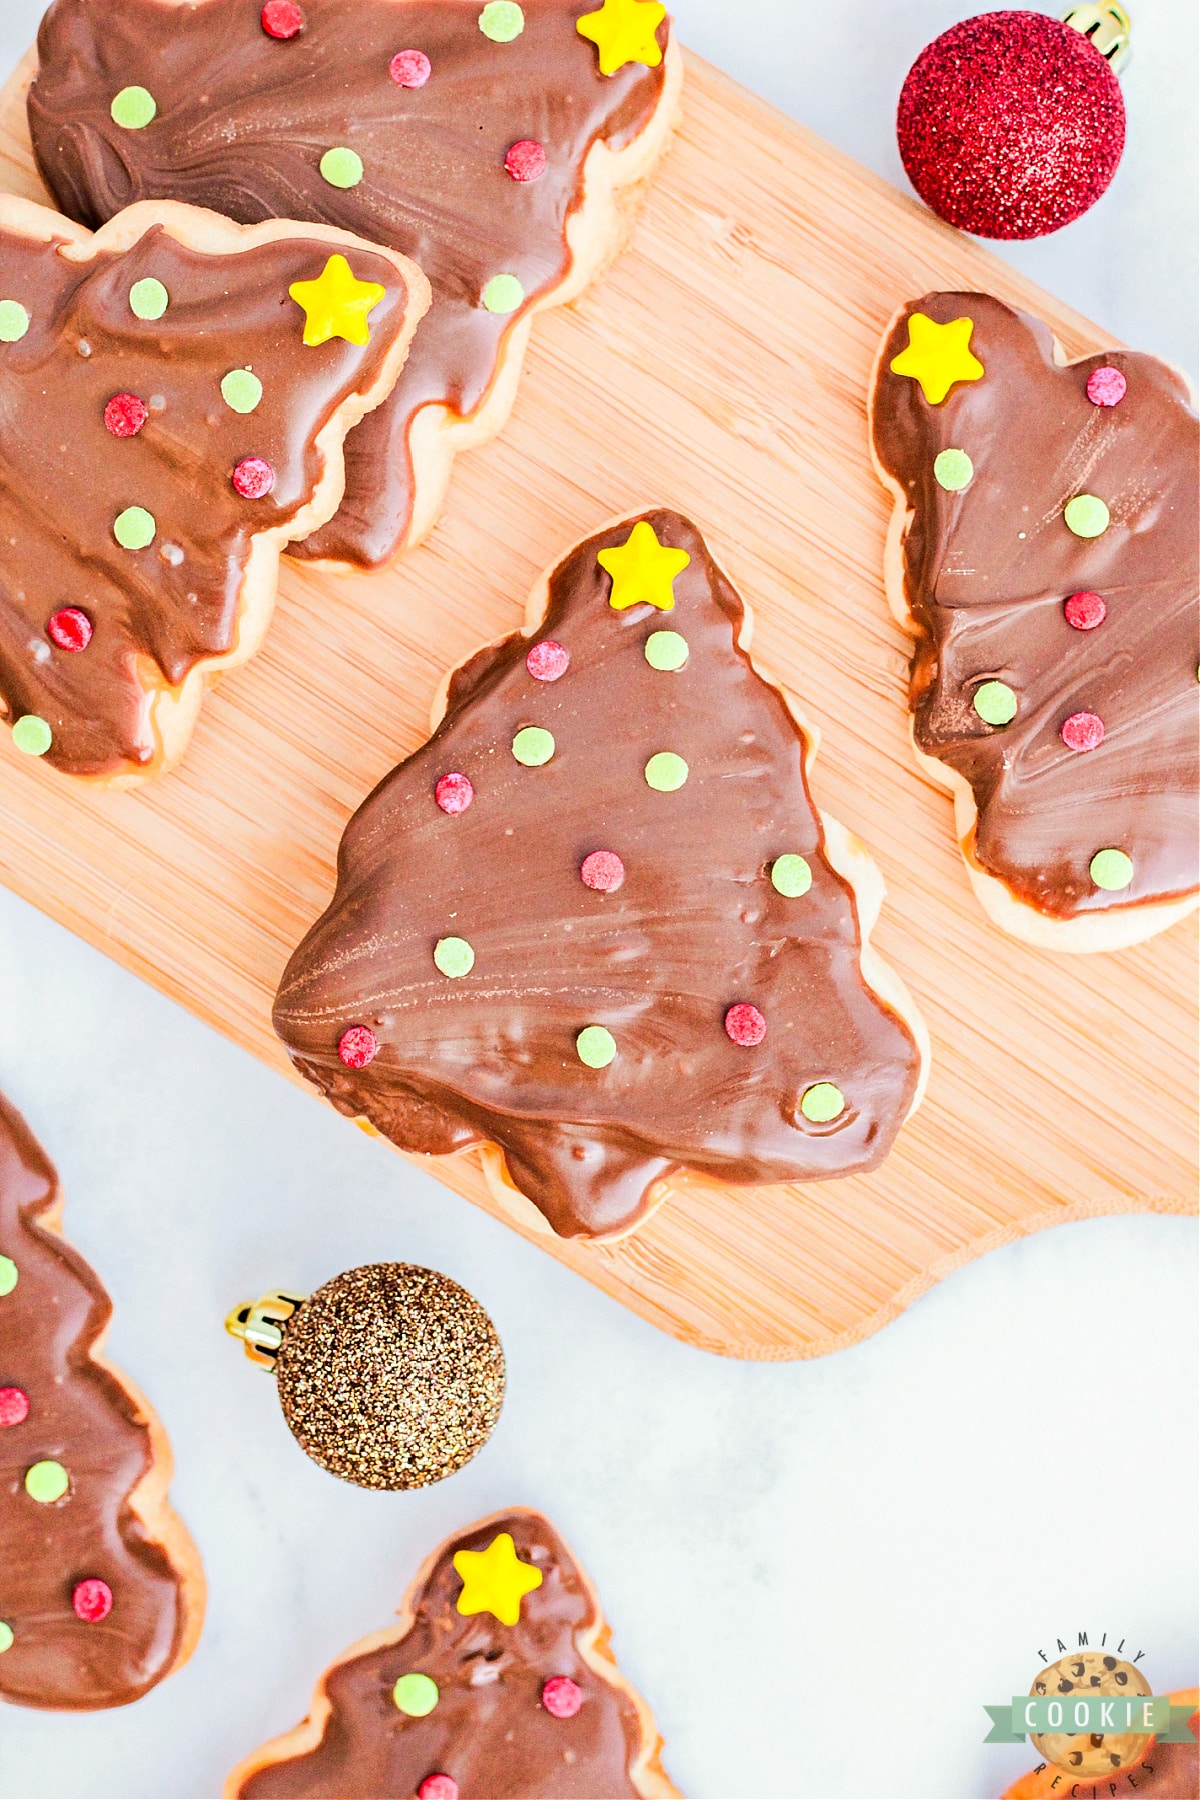 Christmas Tree Twix Cookies are made with a simple sugar cookie topped with caramel, chocolate, and festive sprinkles. Delicious holiday cookies that taste just like your favorite candy bar!